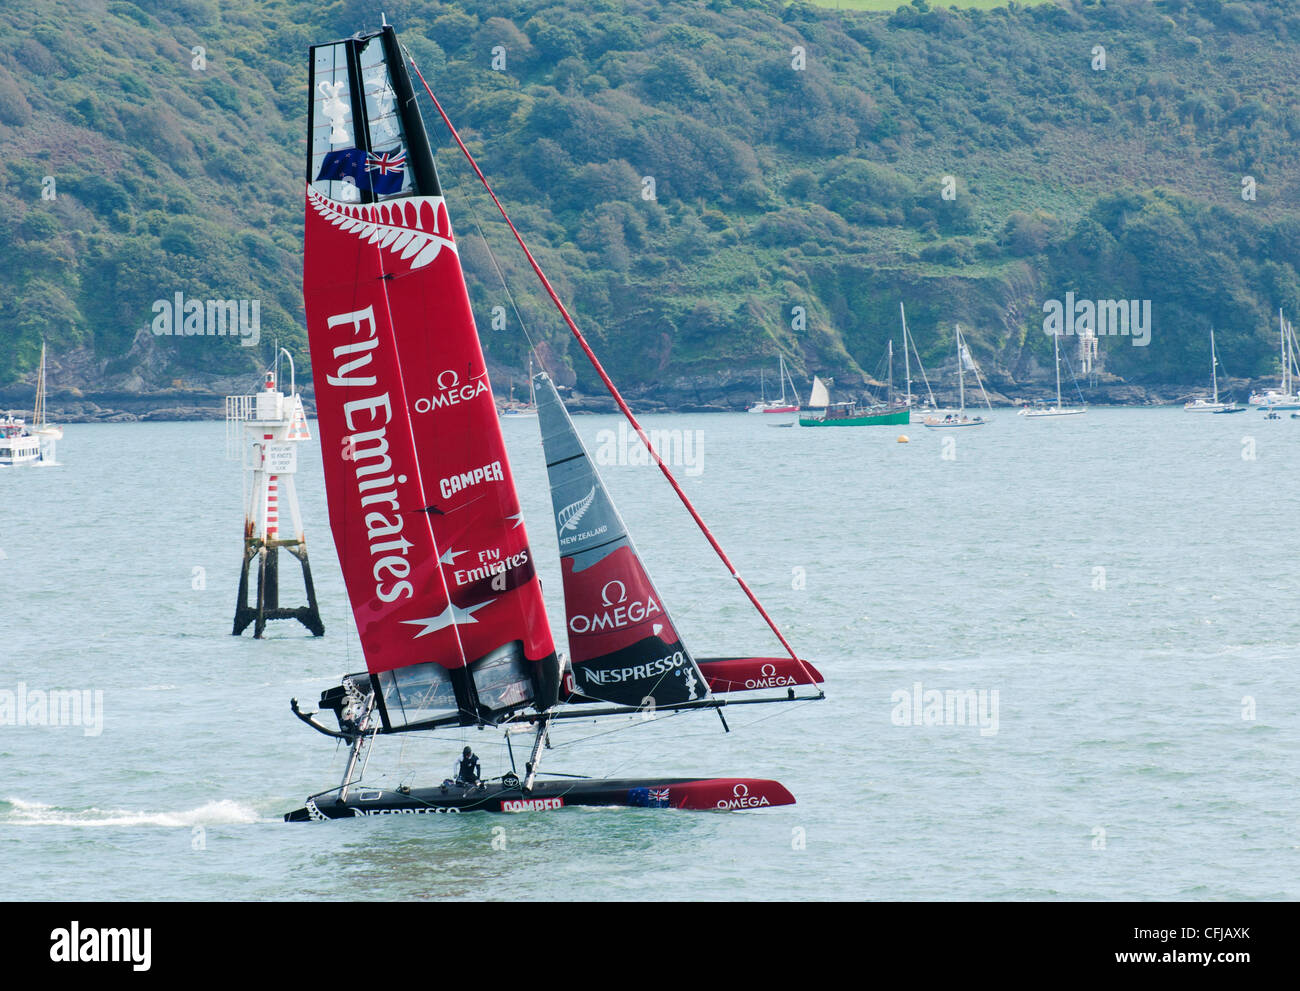 Fly Emirates New Zealand team catamaran flying across Plymouth Sound during America's Cup World Series, Plymouth, UK Stock Photo